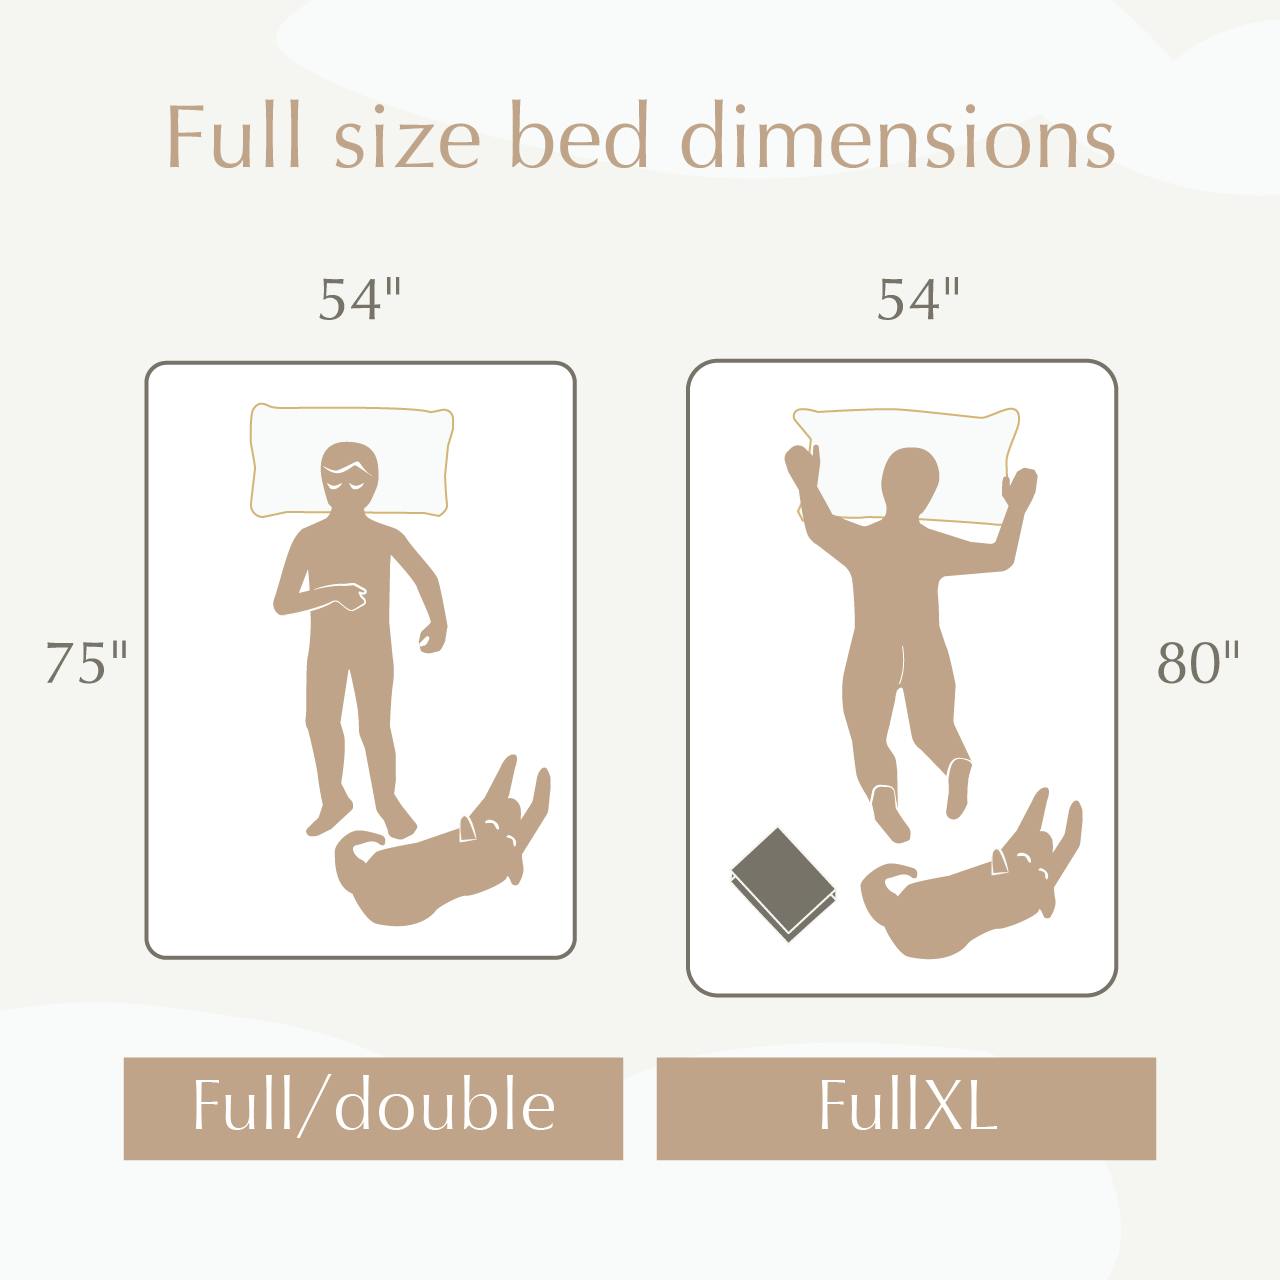 illustration showing the difference between full size bed and full xl bed dimensions